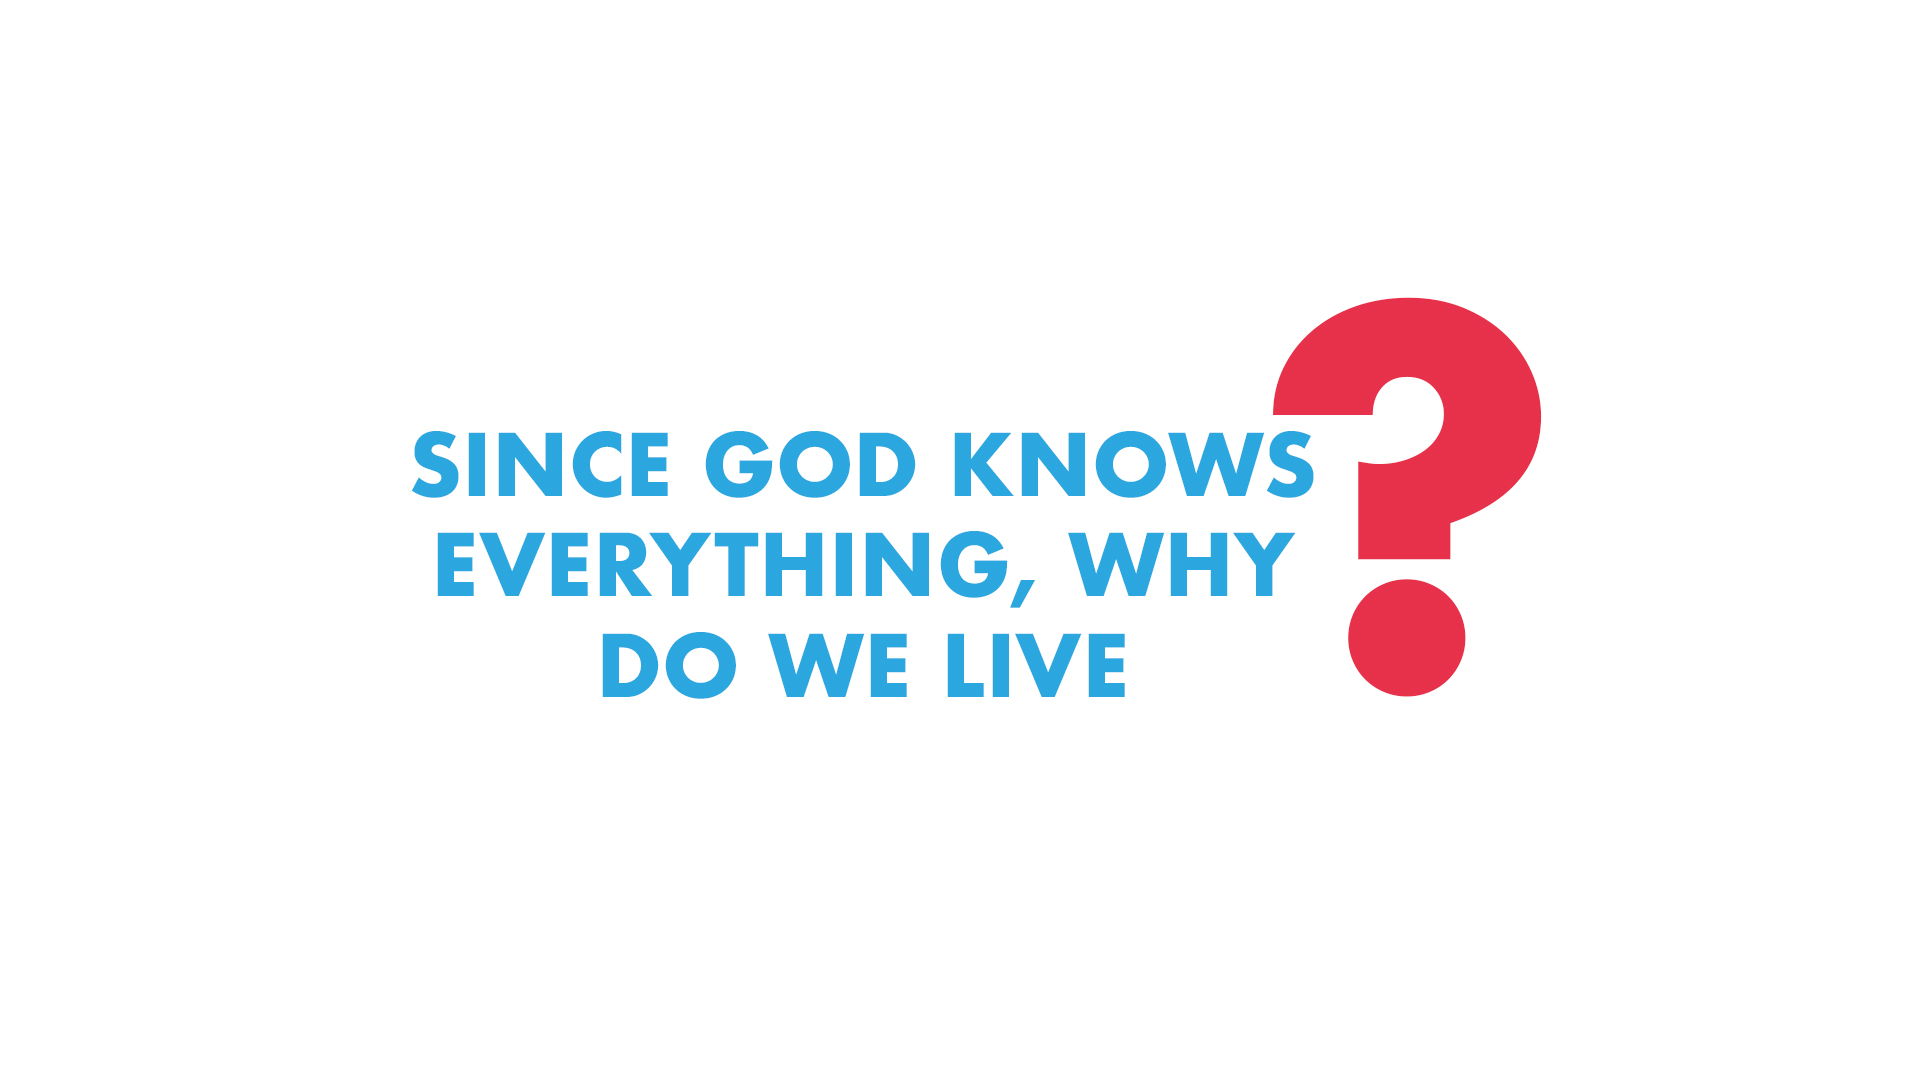 Since God knows Everything, Why do We Live?